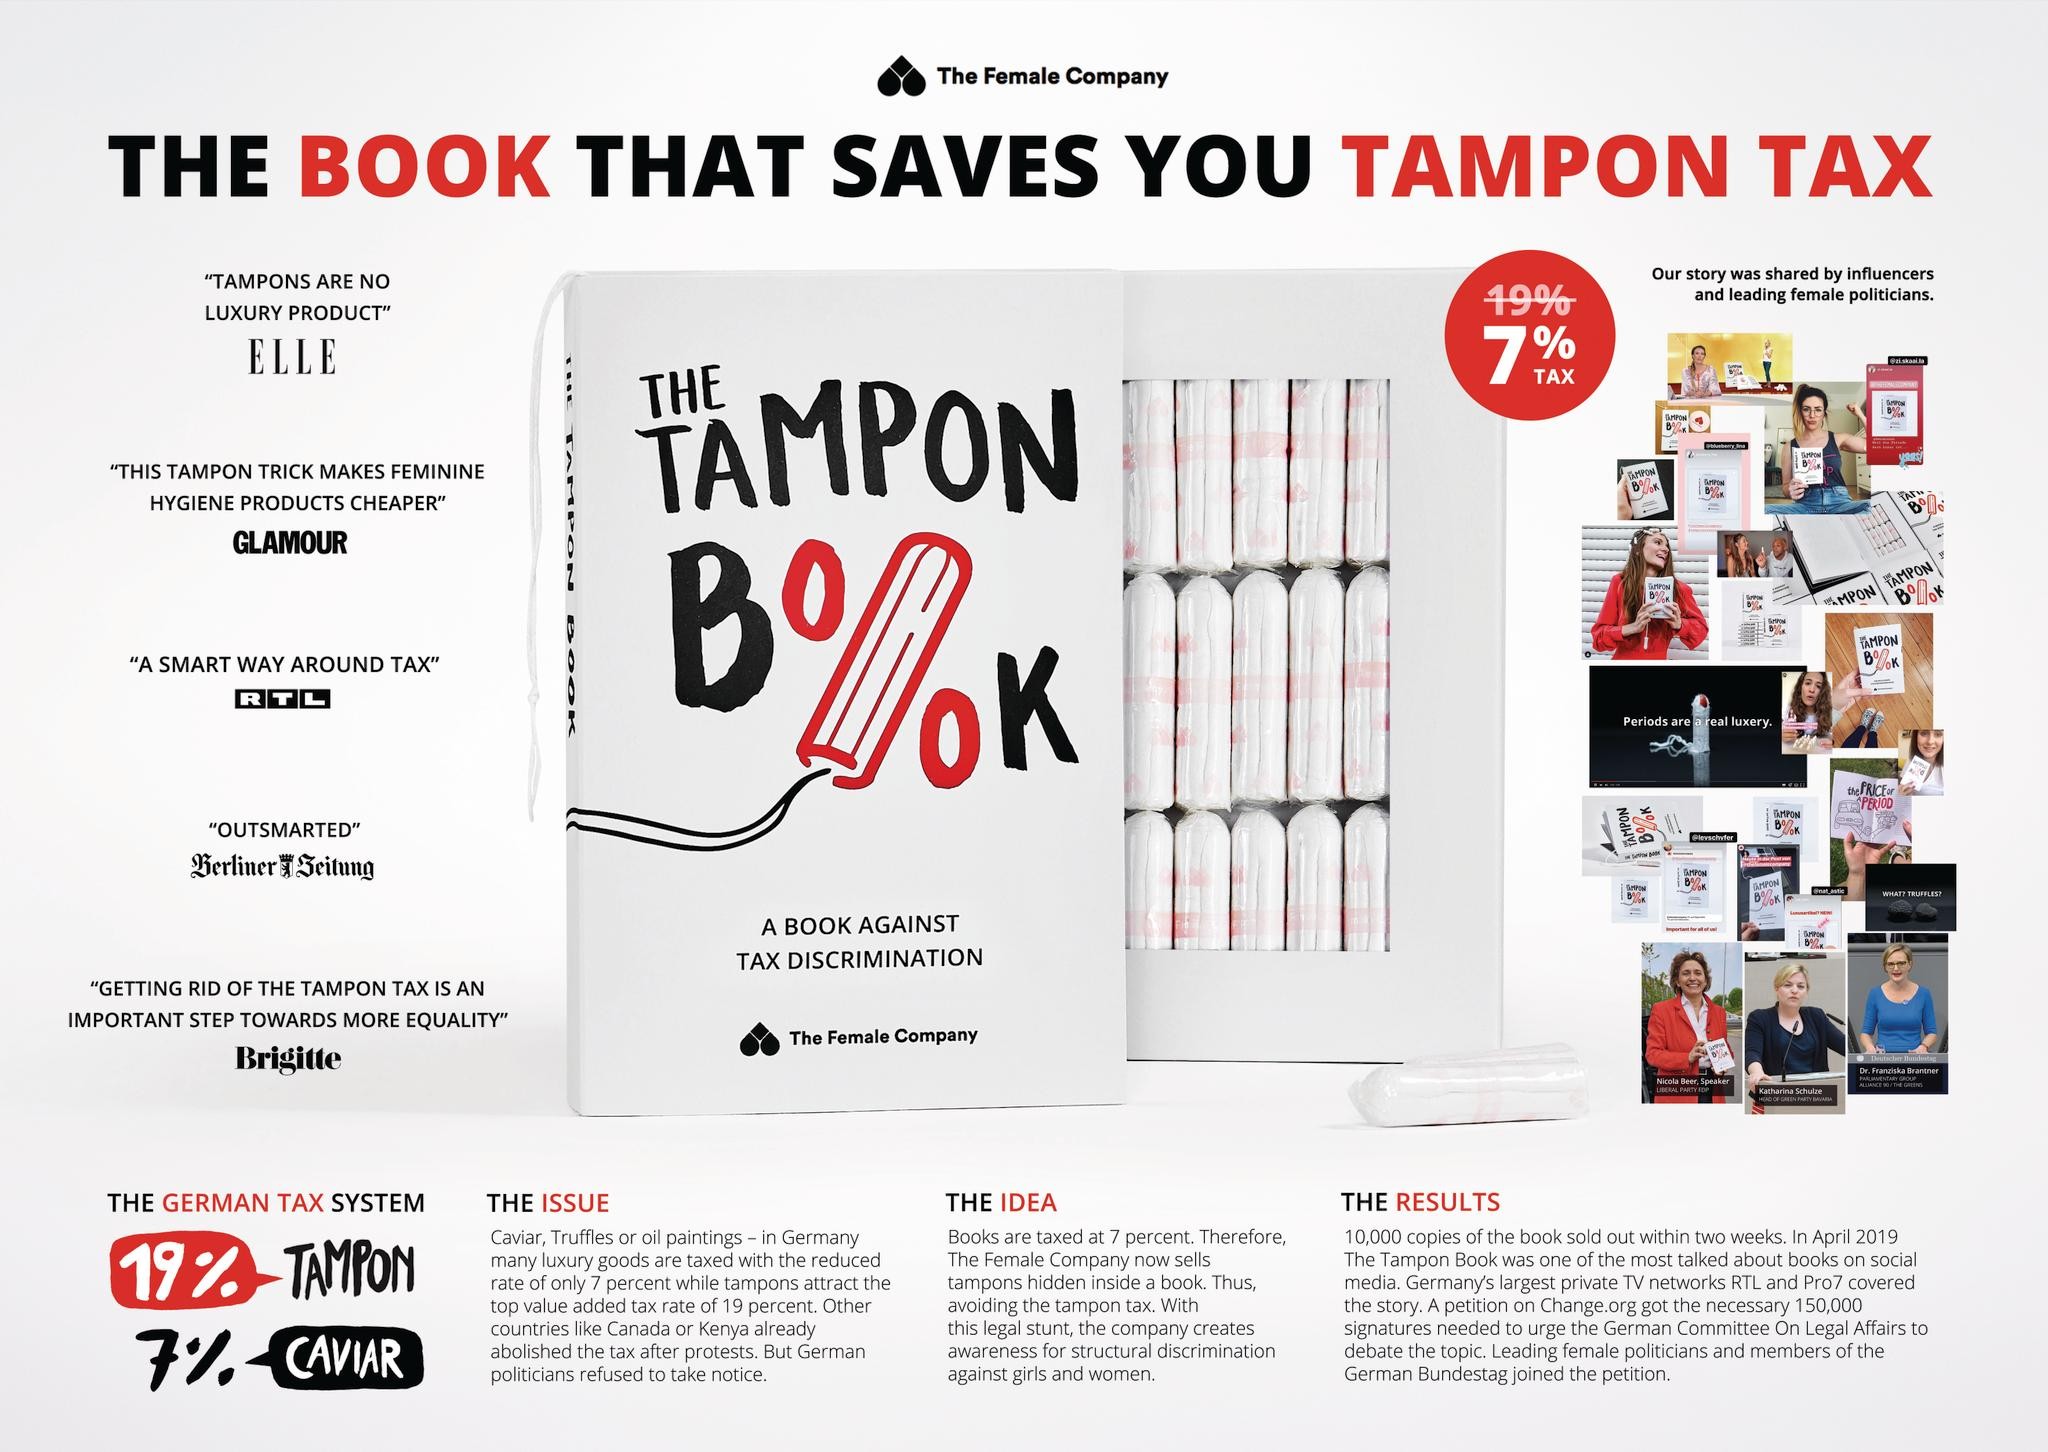 THE TAMPON BOOK: A BOOK AGAINST TAX DISCRIMINATION